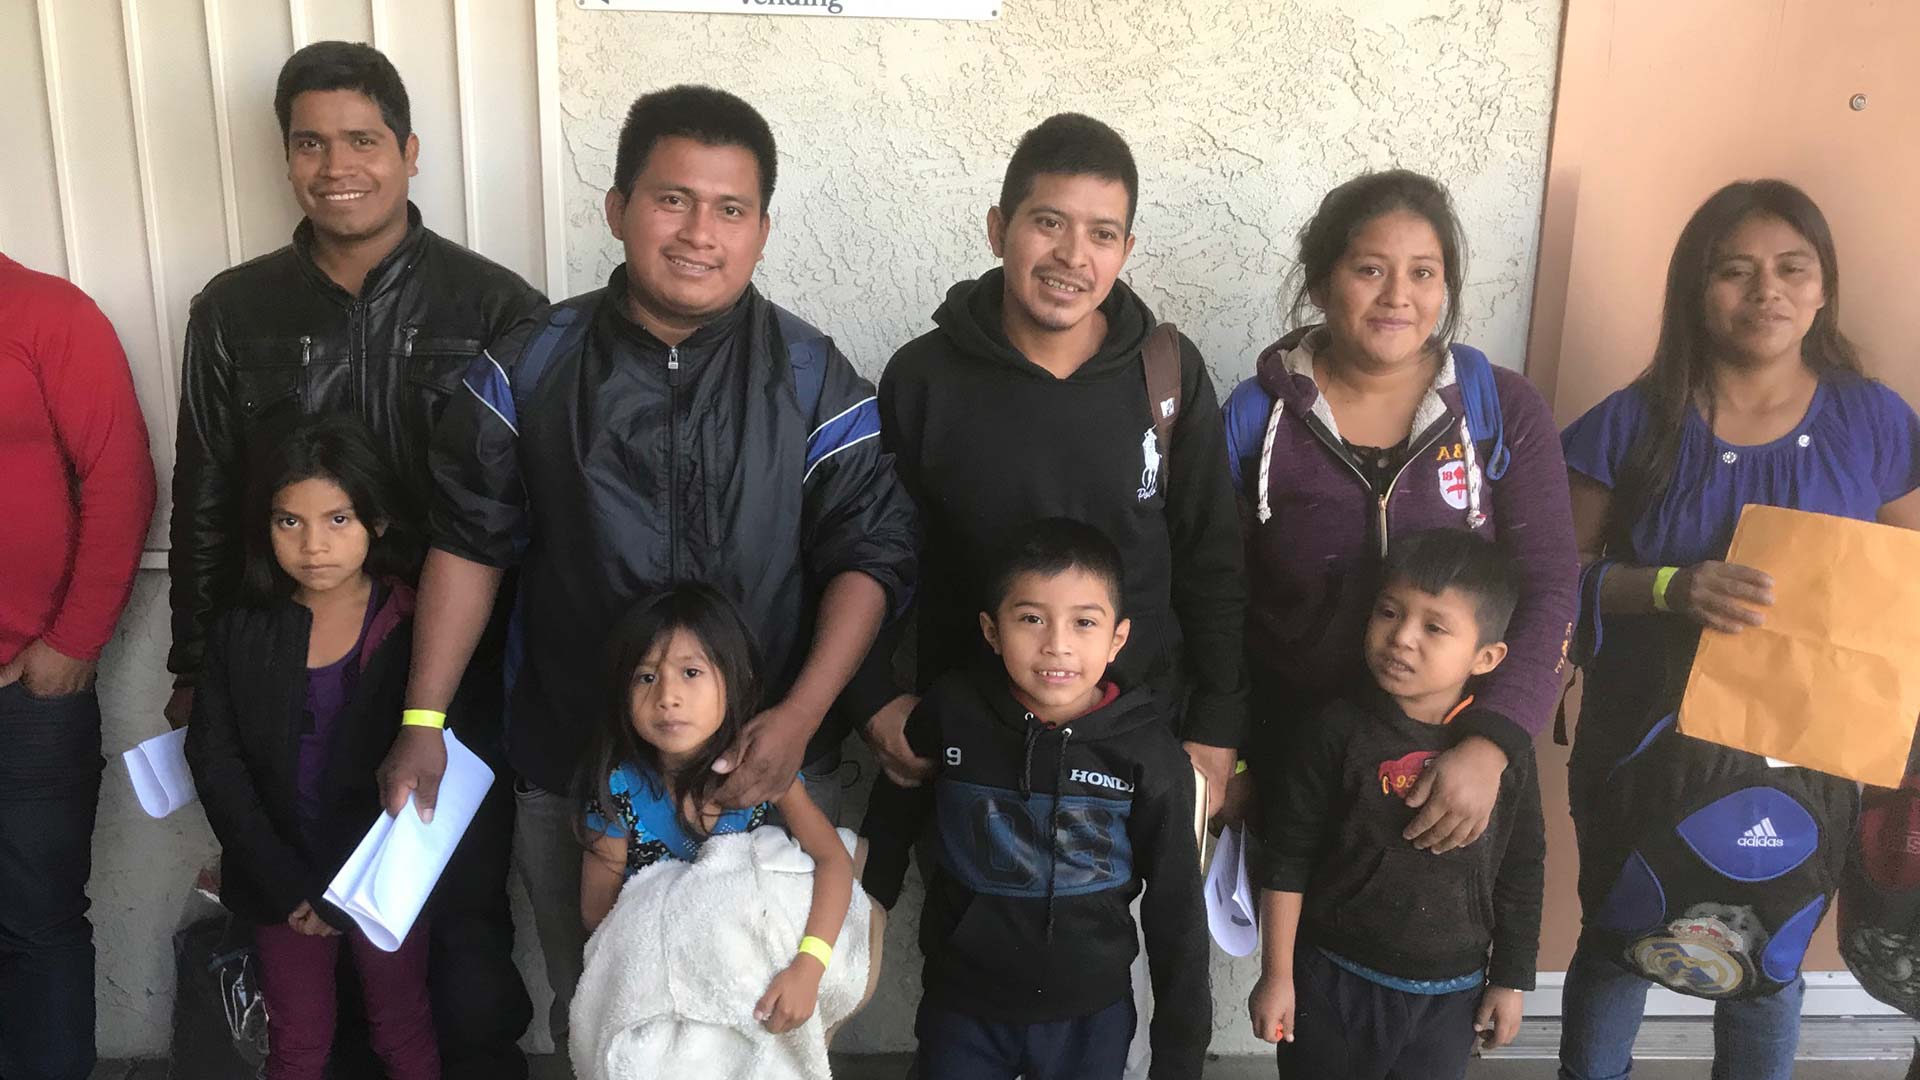 Families from Guatemala